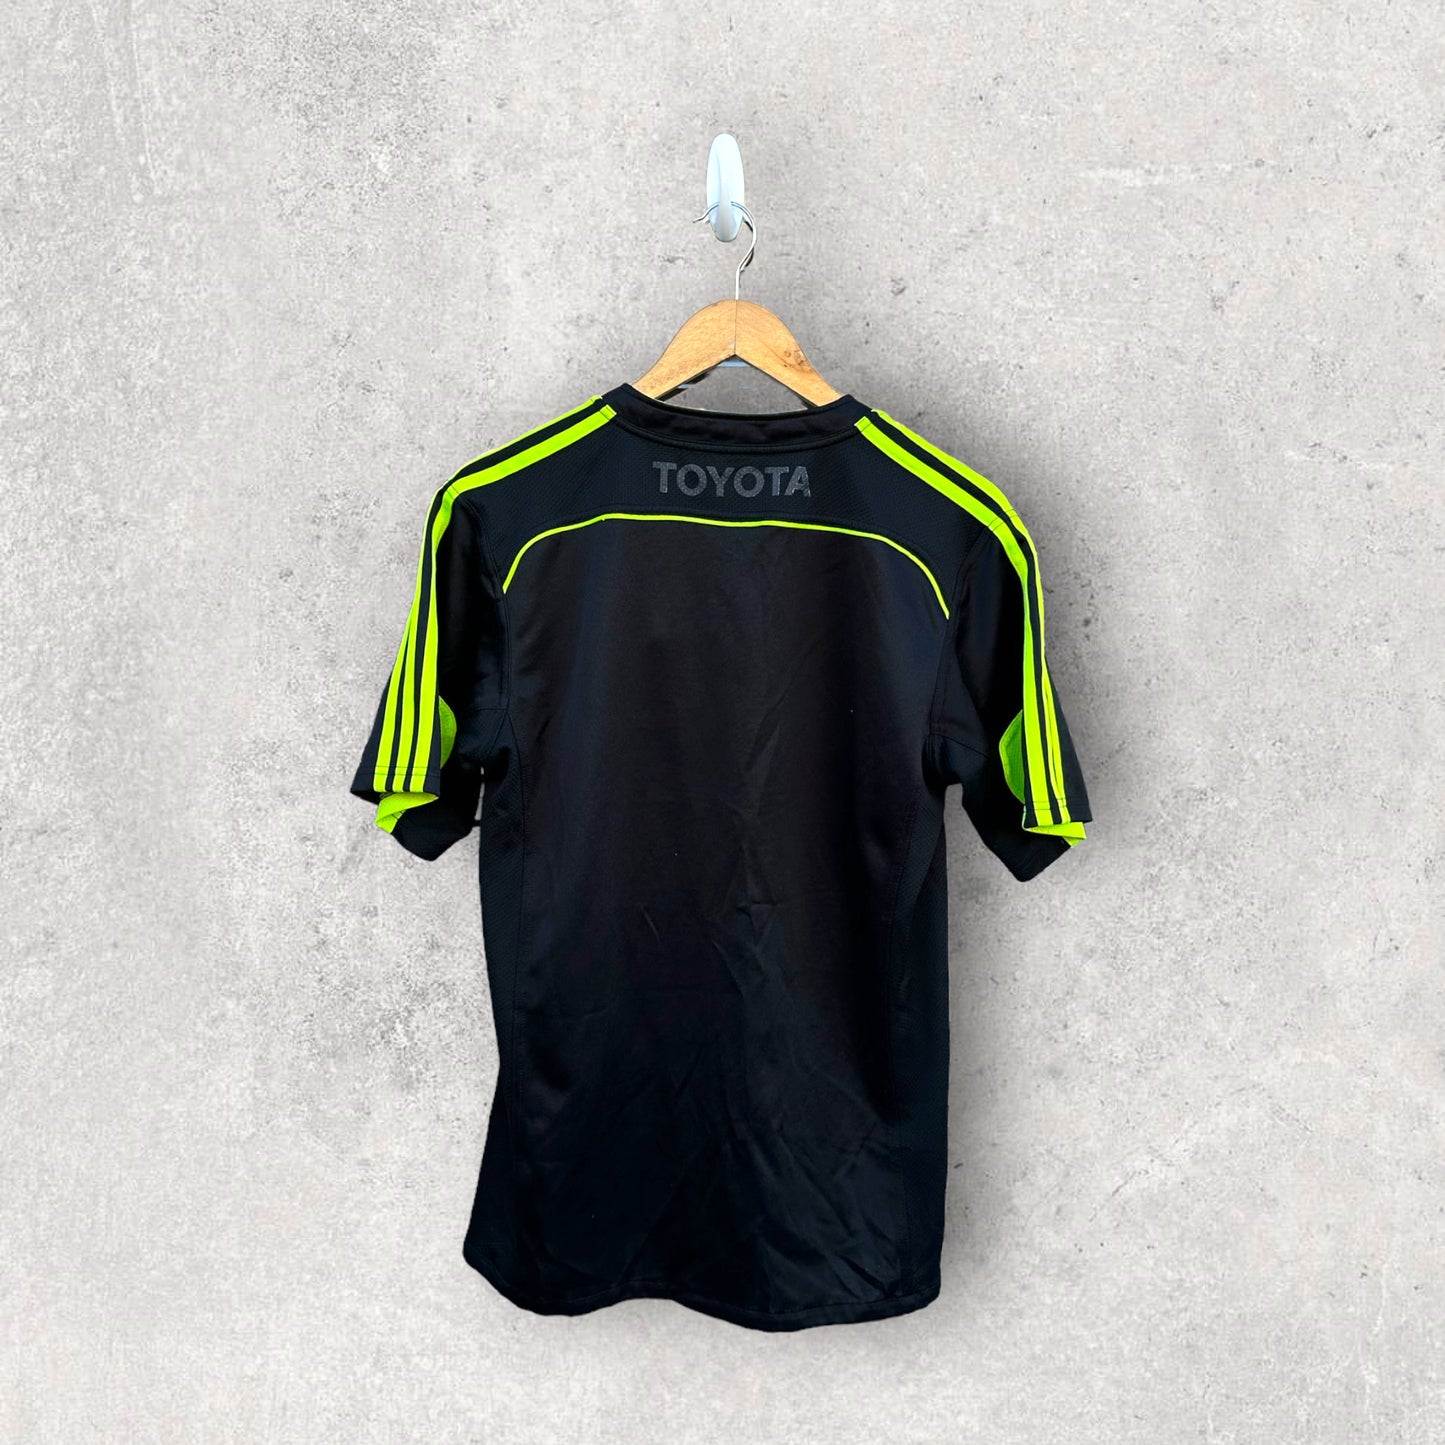 MUNSTER RUGBY ADIDAS JERSEY